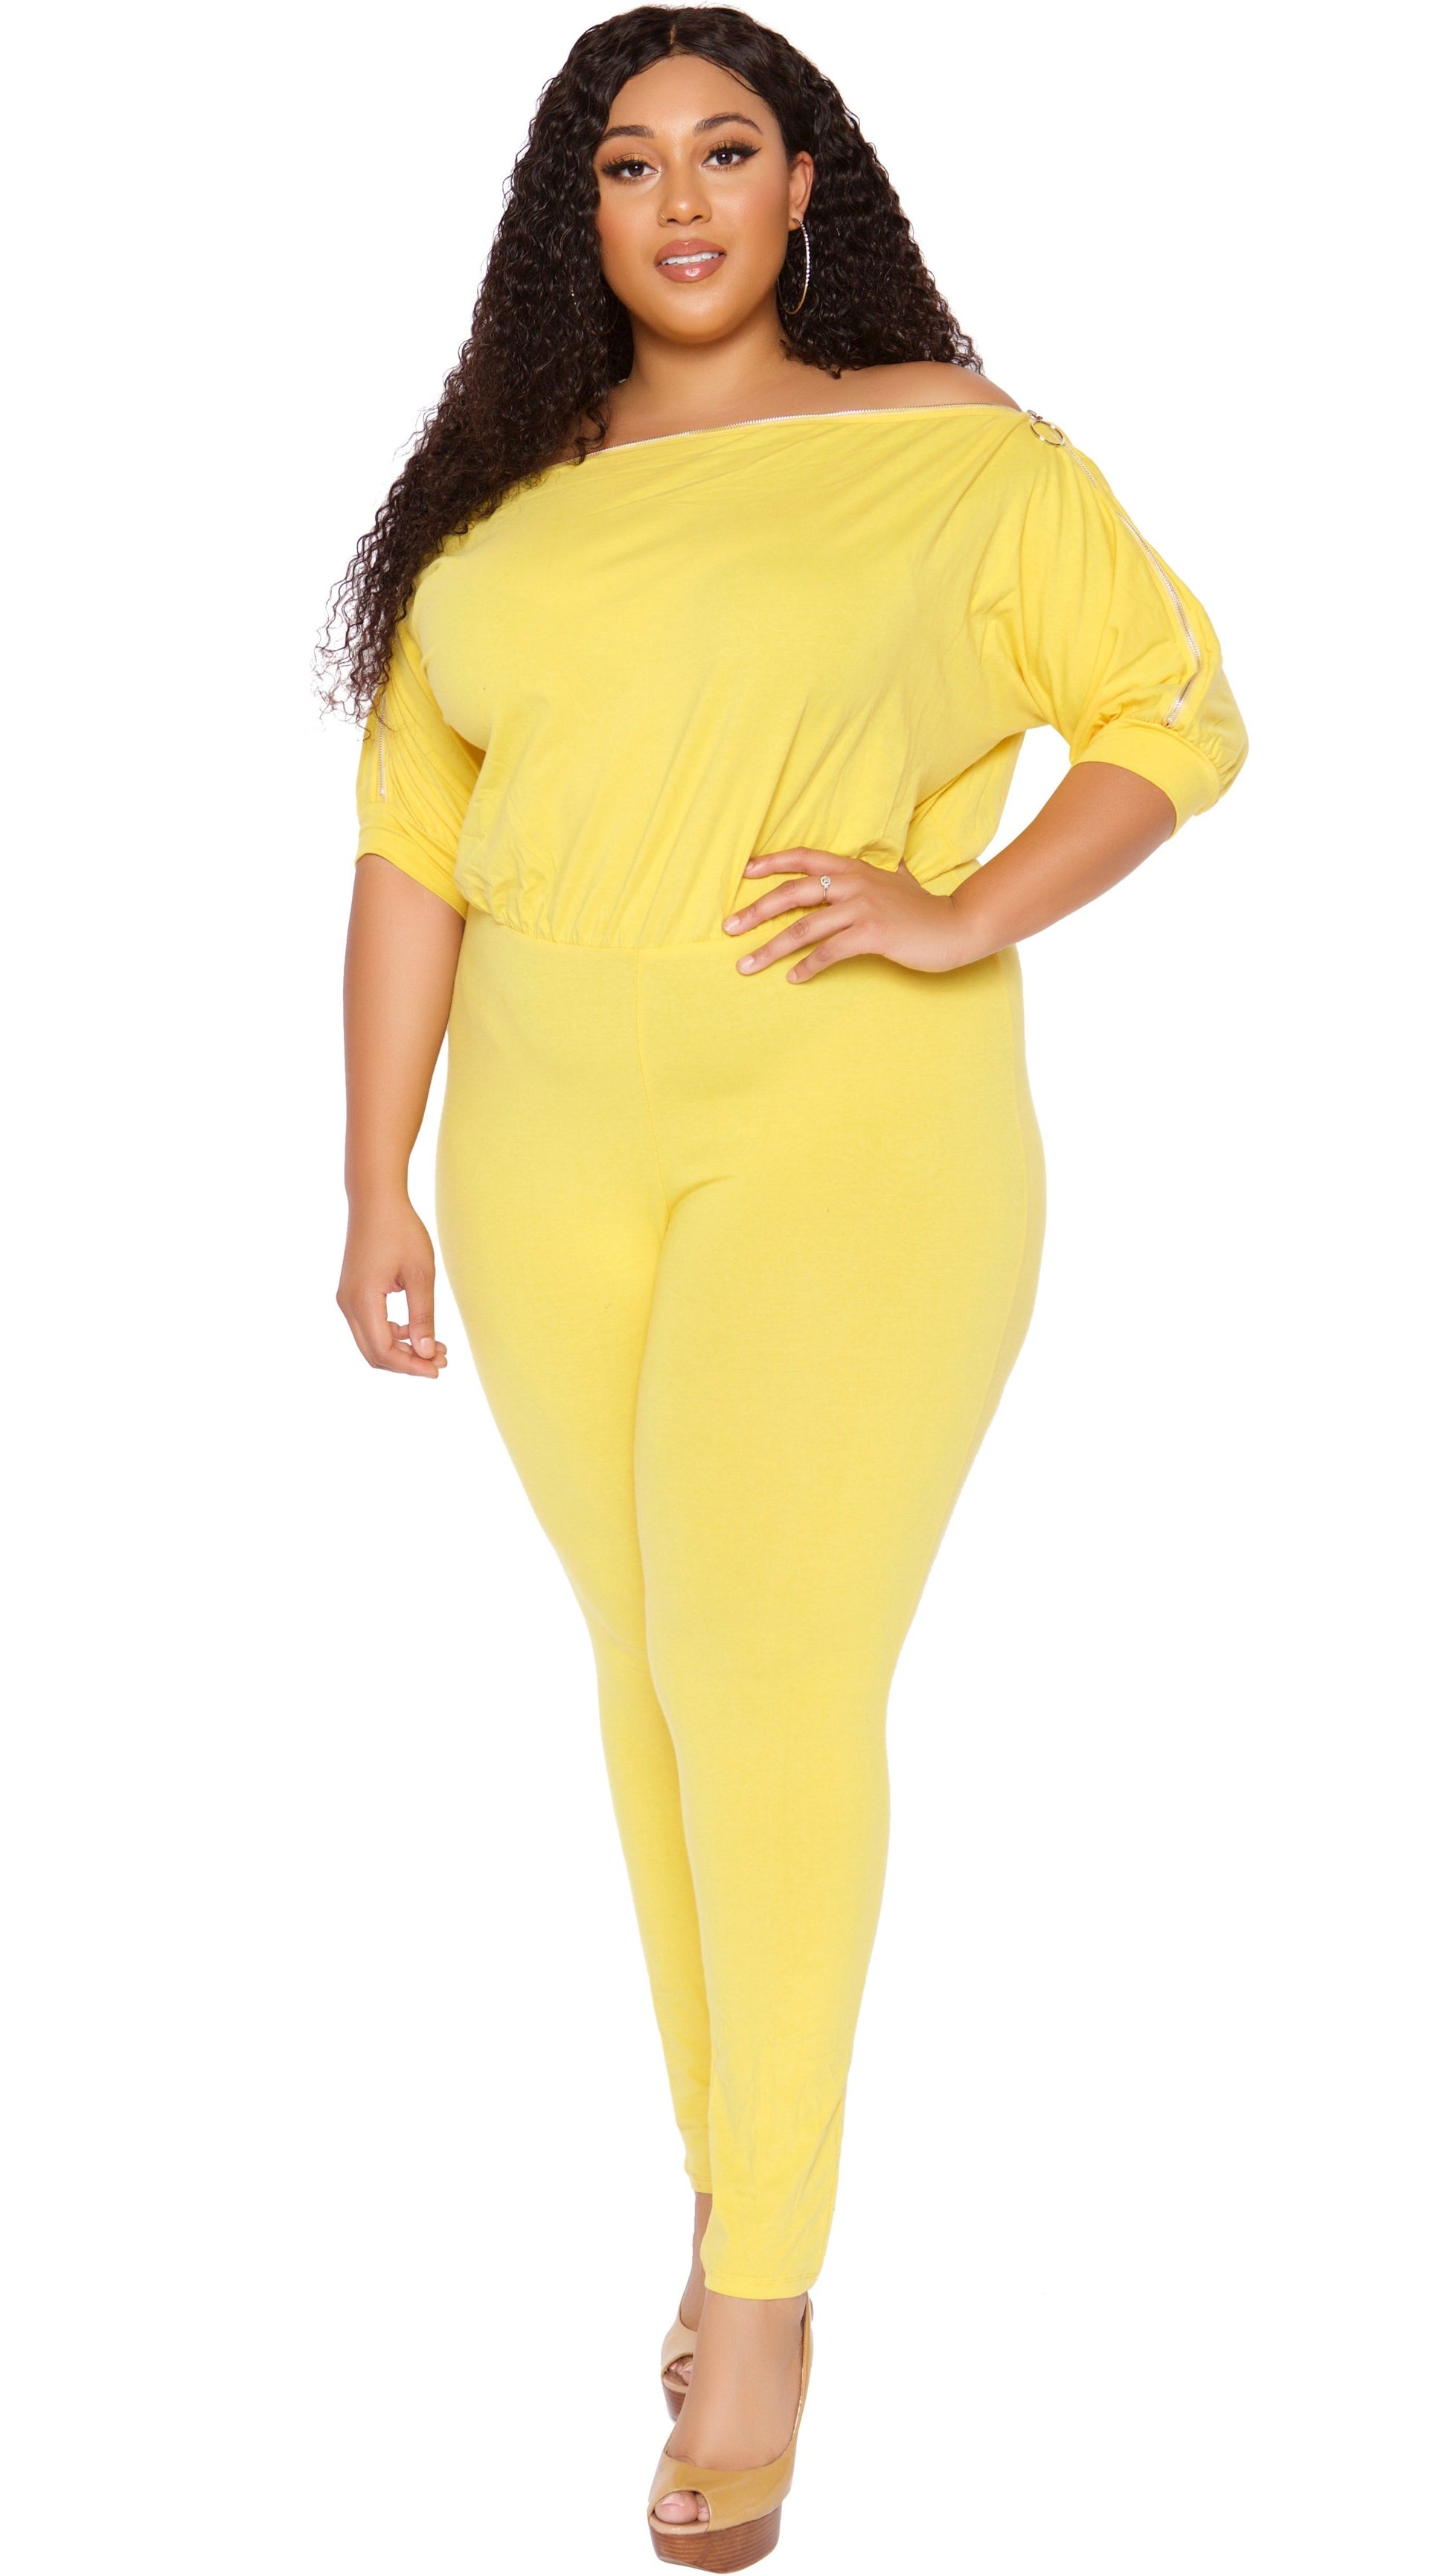 Lemon Ice Jumper (Yellow)-Jumpers-Boughie-Boughie